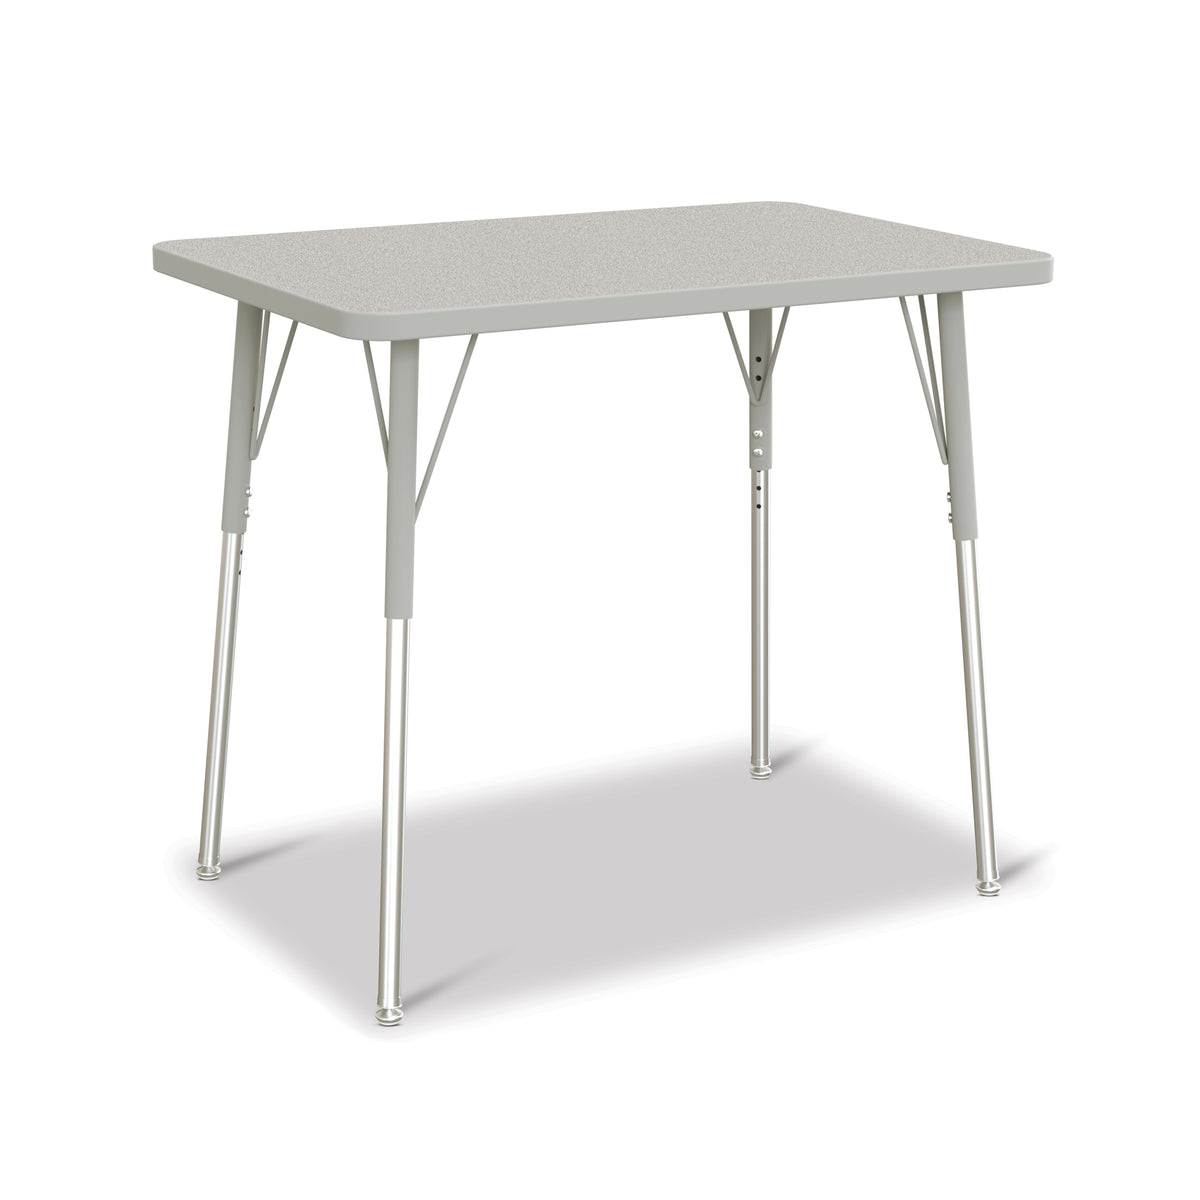 6478JCA000, Berries Rectangle Activity Table - 24" X 36", A-height - Freckled Gray/Gray/Gray